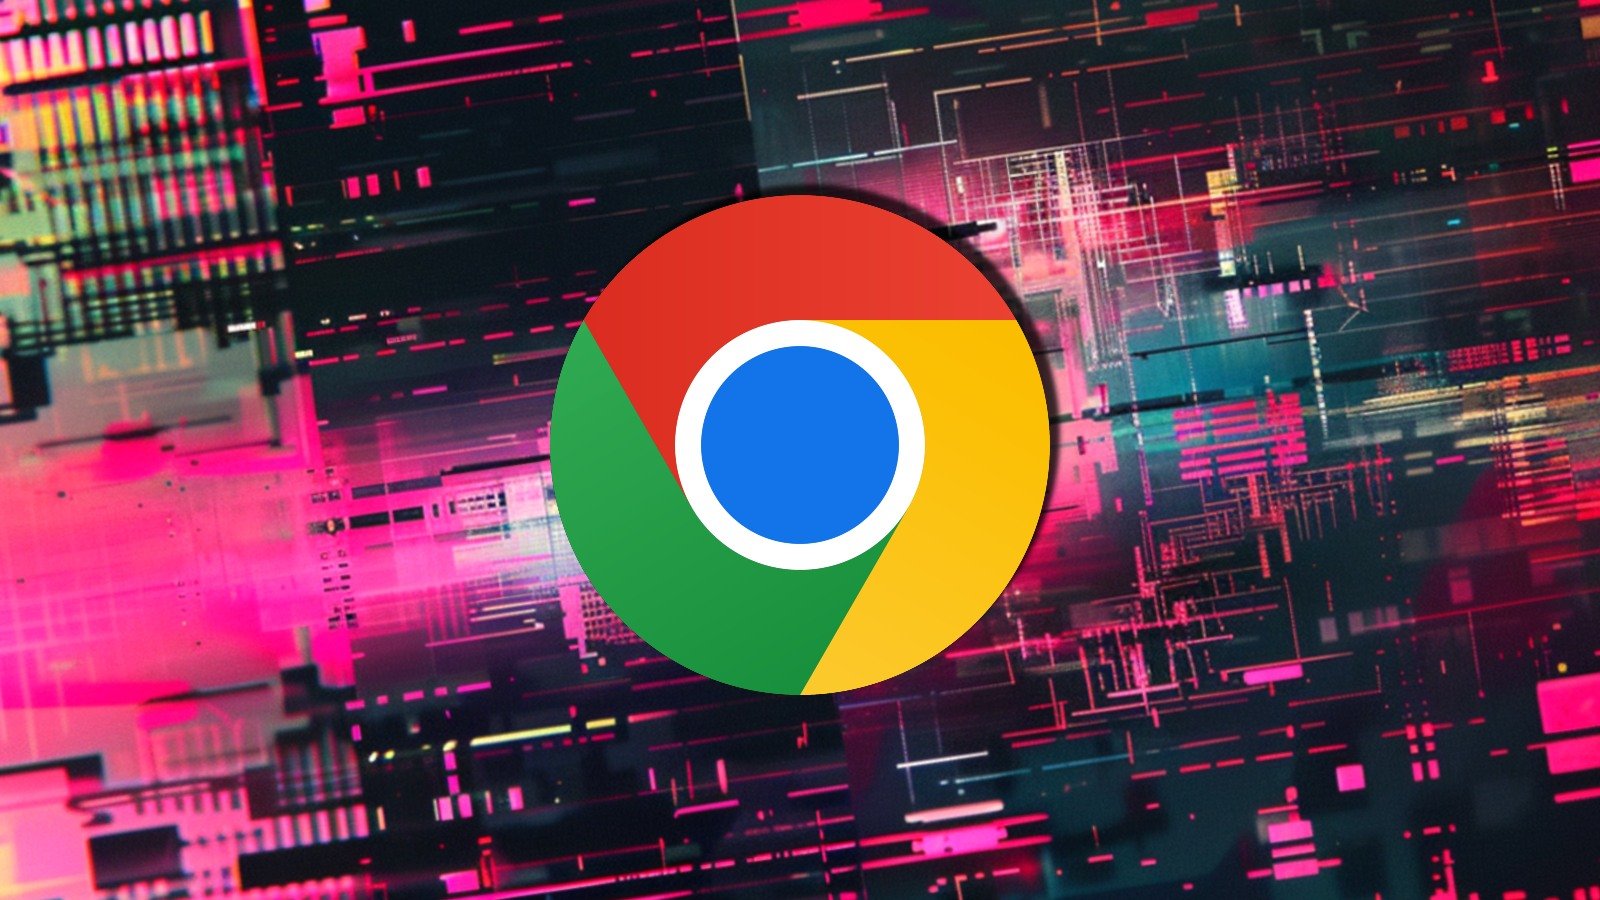 Google Chrome warns uBlock Origin may soon be disabled and tells users to switch to other ad blockers before deprecation of Manifest V2 extensions